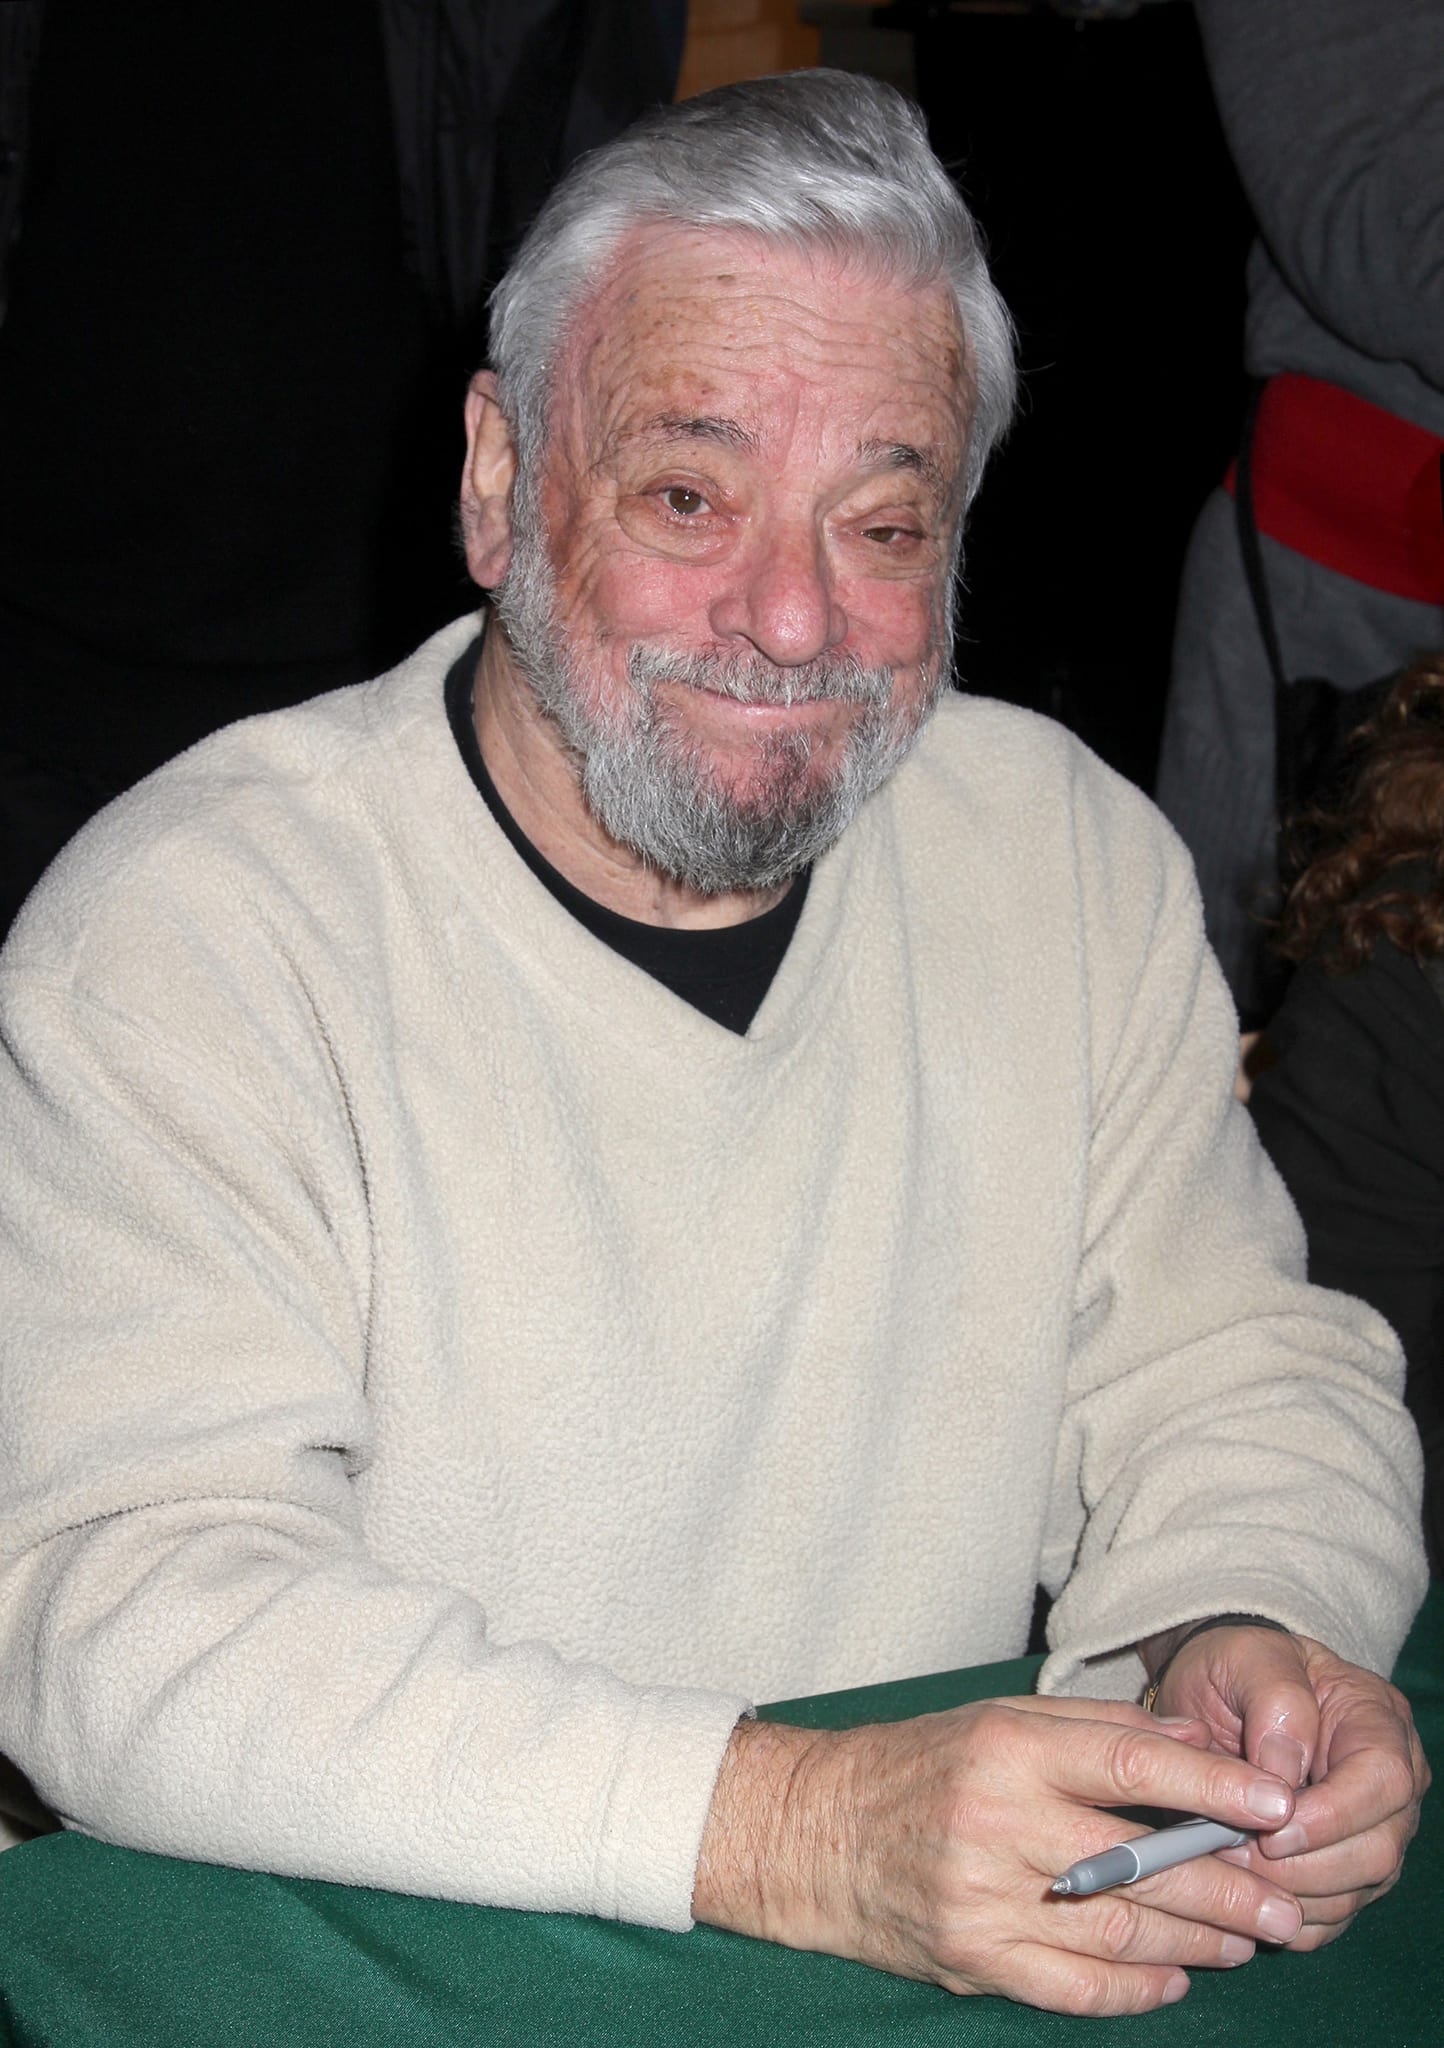 American composer and lyricist Stephen Sondheim died of cardiovascular disease at his home at the age of 91